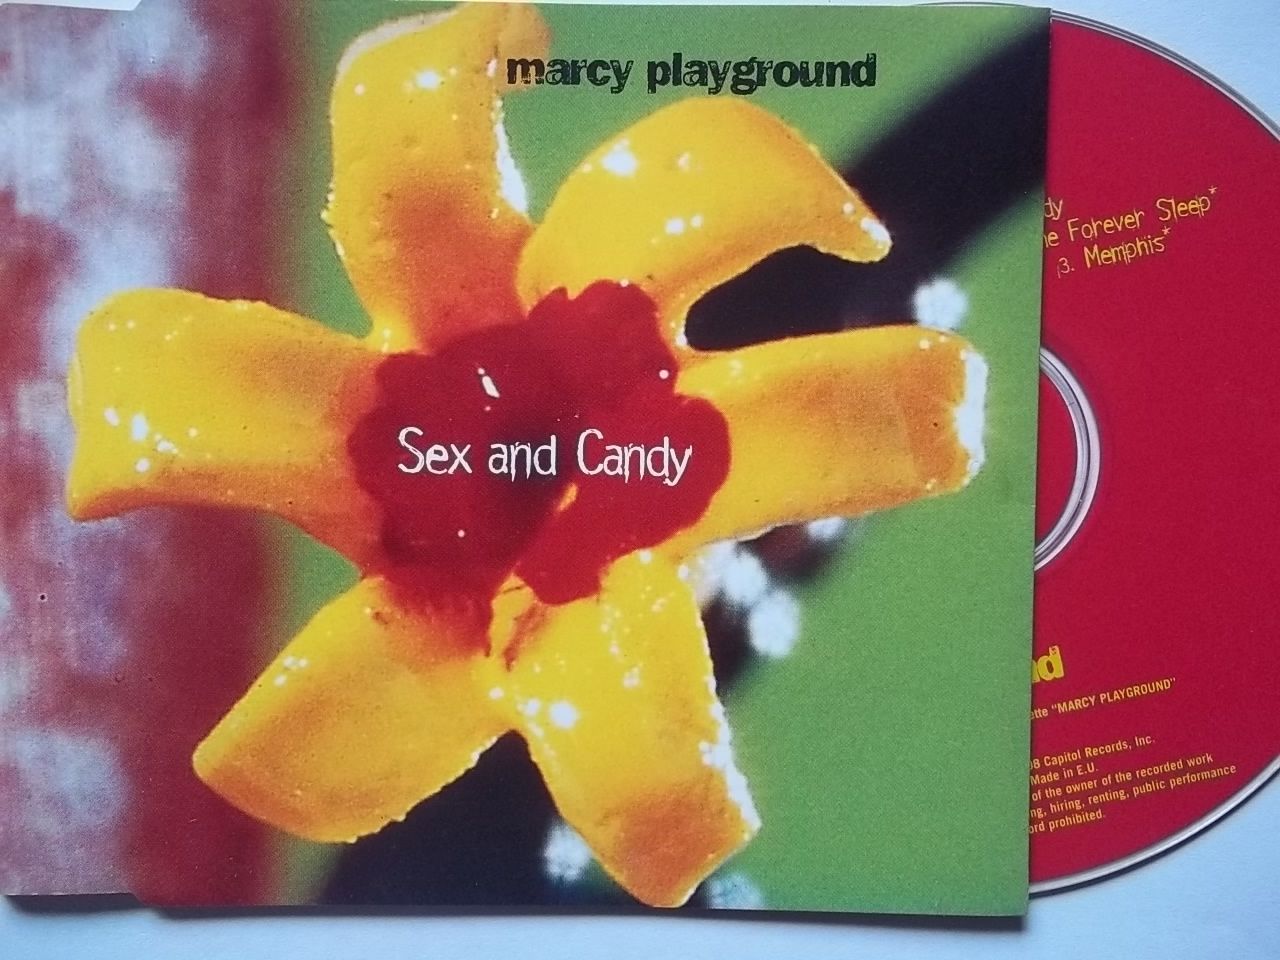 Marcy Playground 106 Vinyl Records And Cds Found On Cdandlp 